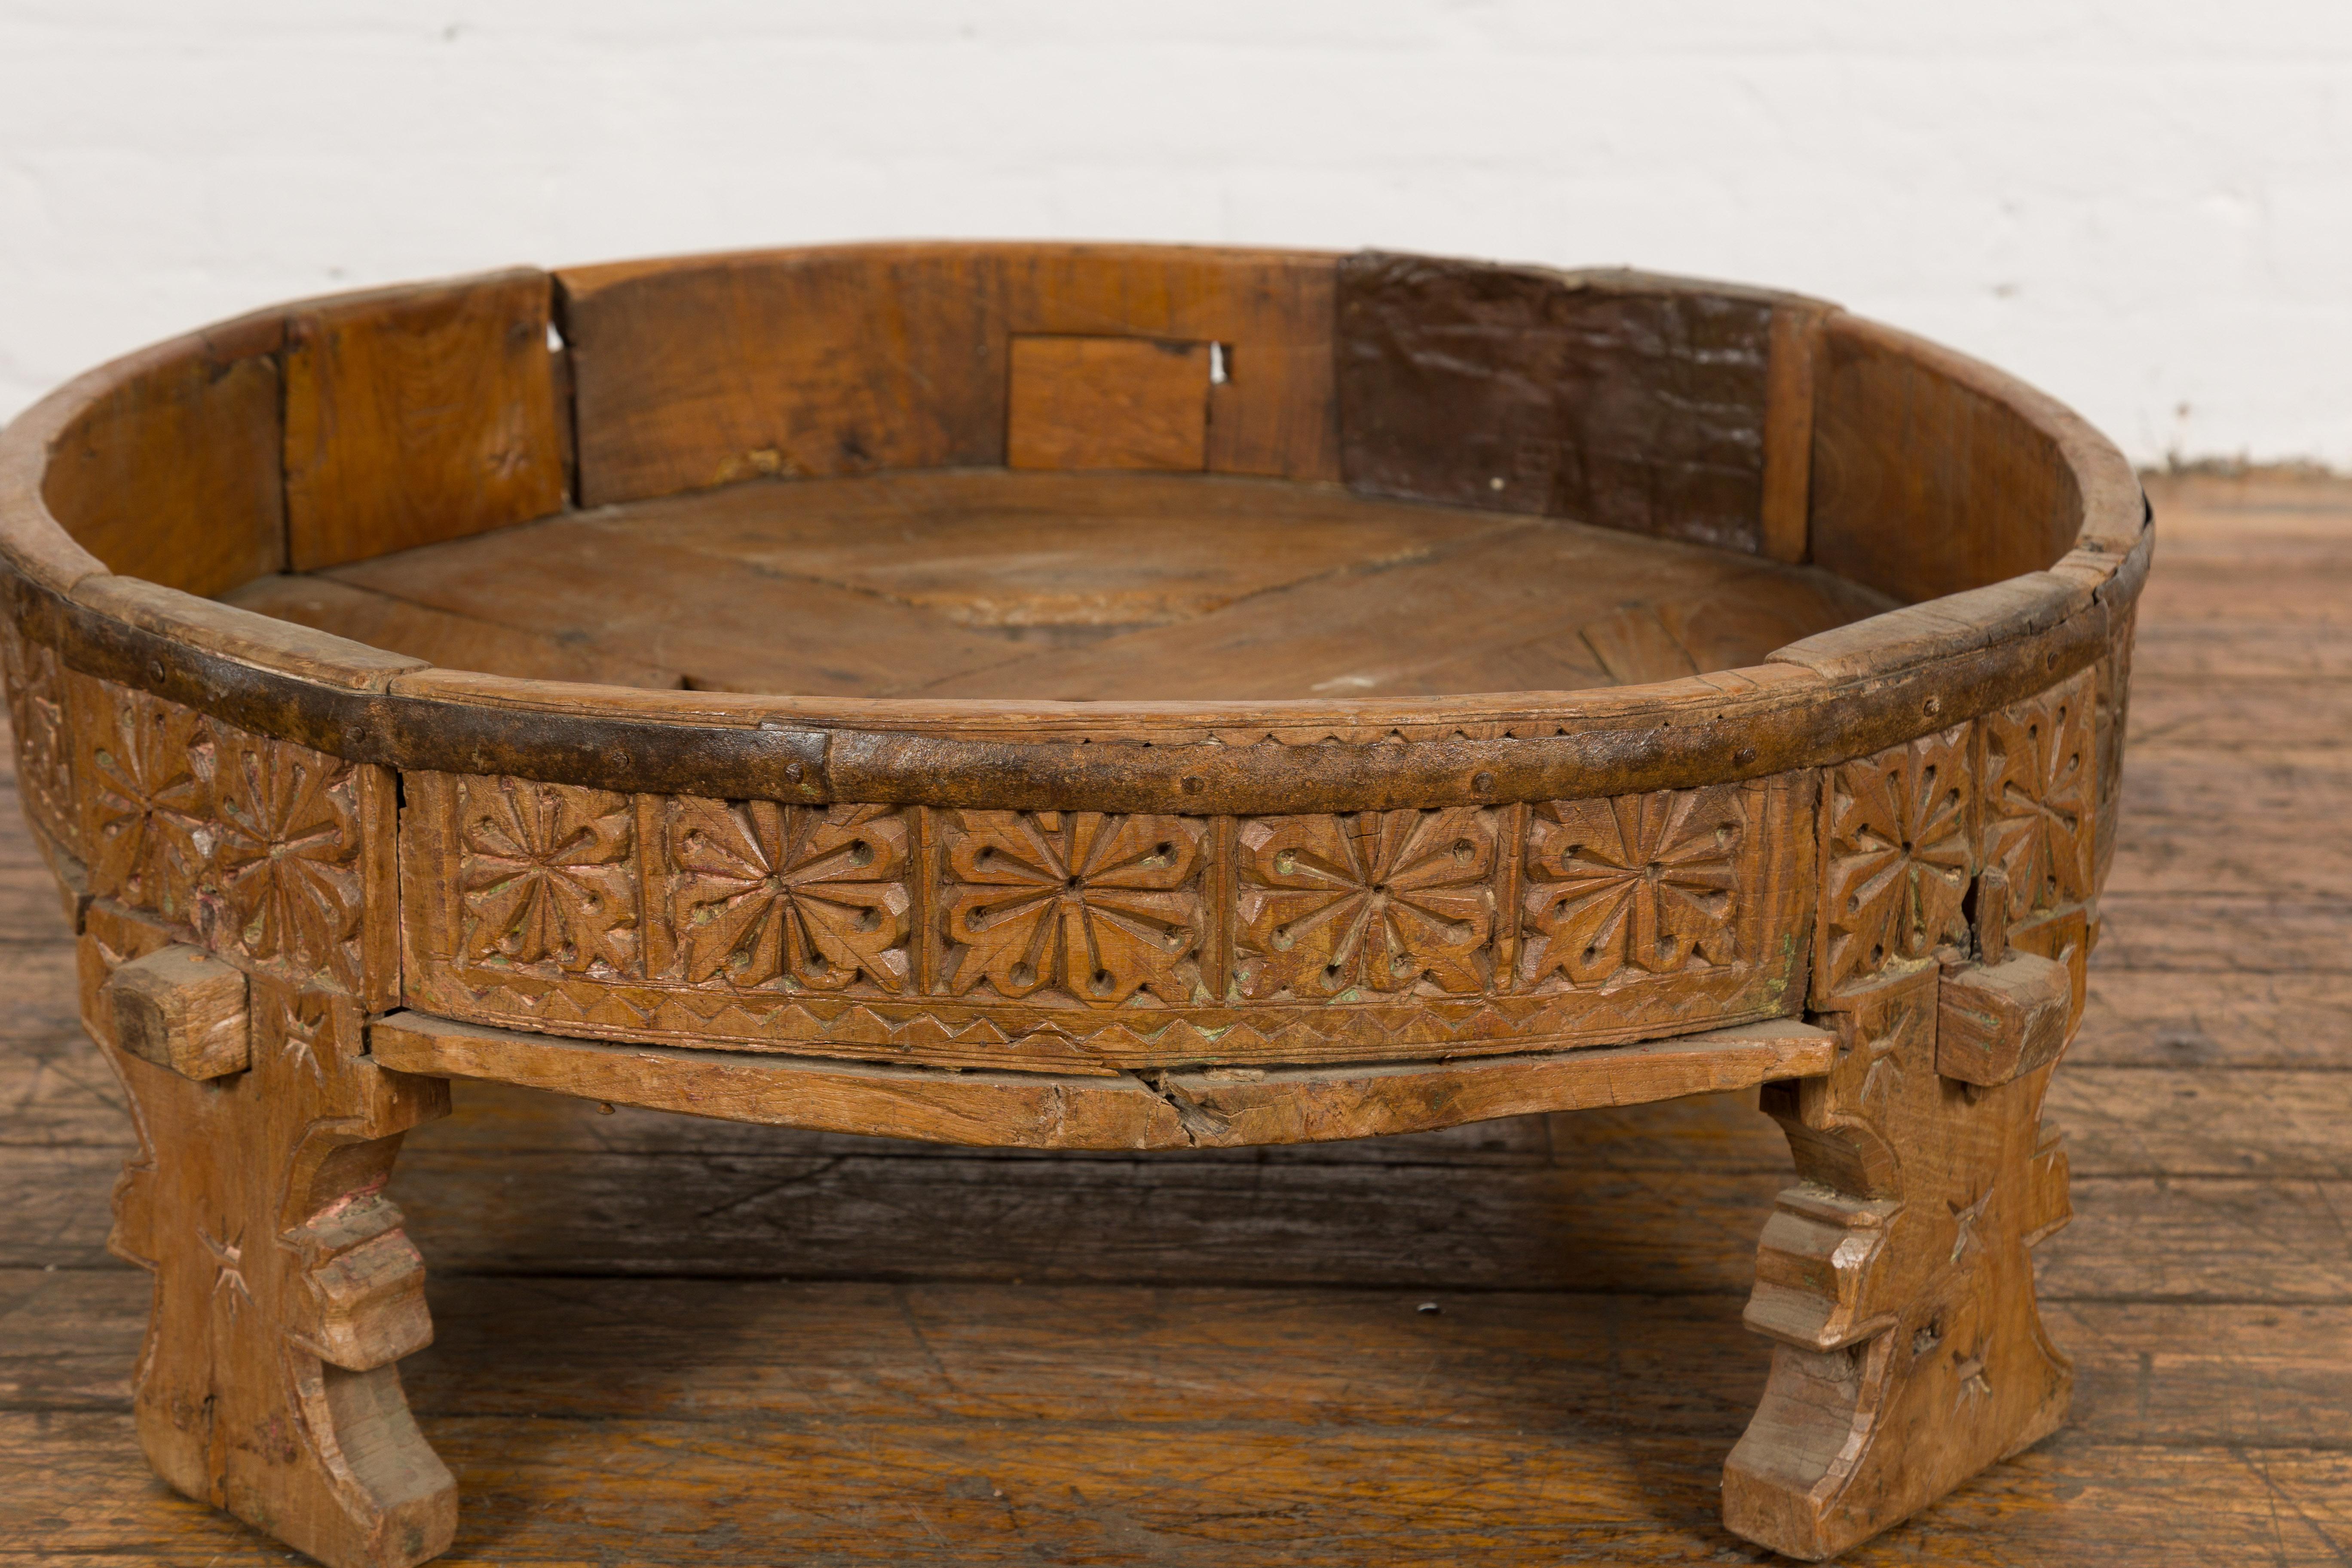 Indian Tribal 1920s Teak Chakki Grinding Table with Geometric Hand-Carved Motifs In Good Condition For Sale In Yonkers, NY